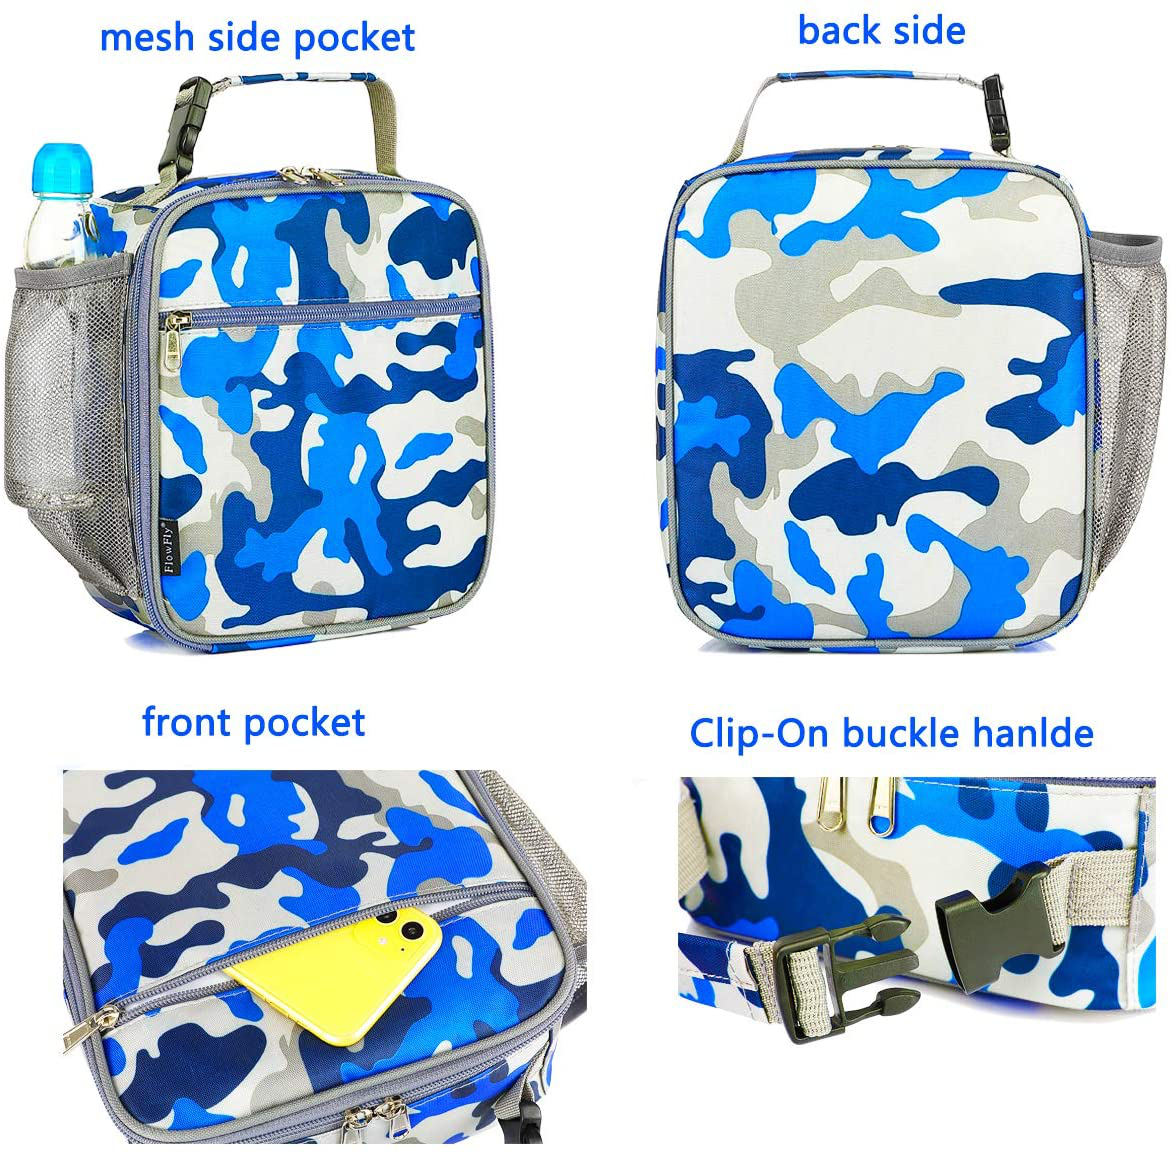 FlowFly Lunch box Insulated Lunch Bag Adult Lunchbox Reusable Cooler Tough & Spacious Tote Bag Designed for Men,Adults,Women,Kids,Digital Camo